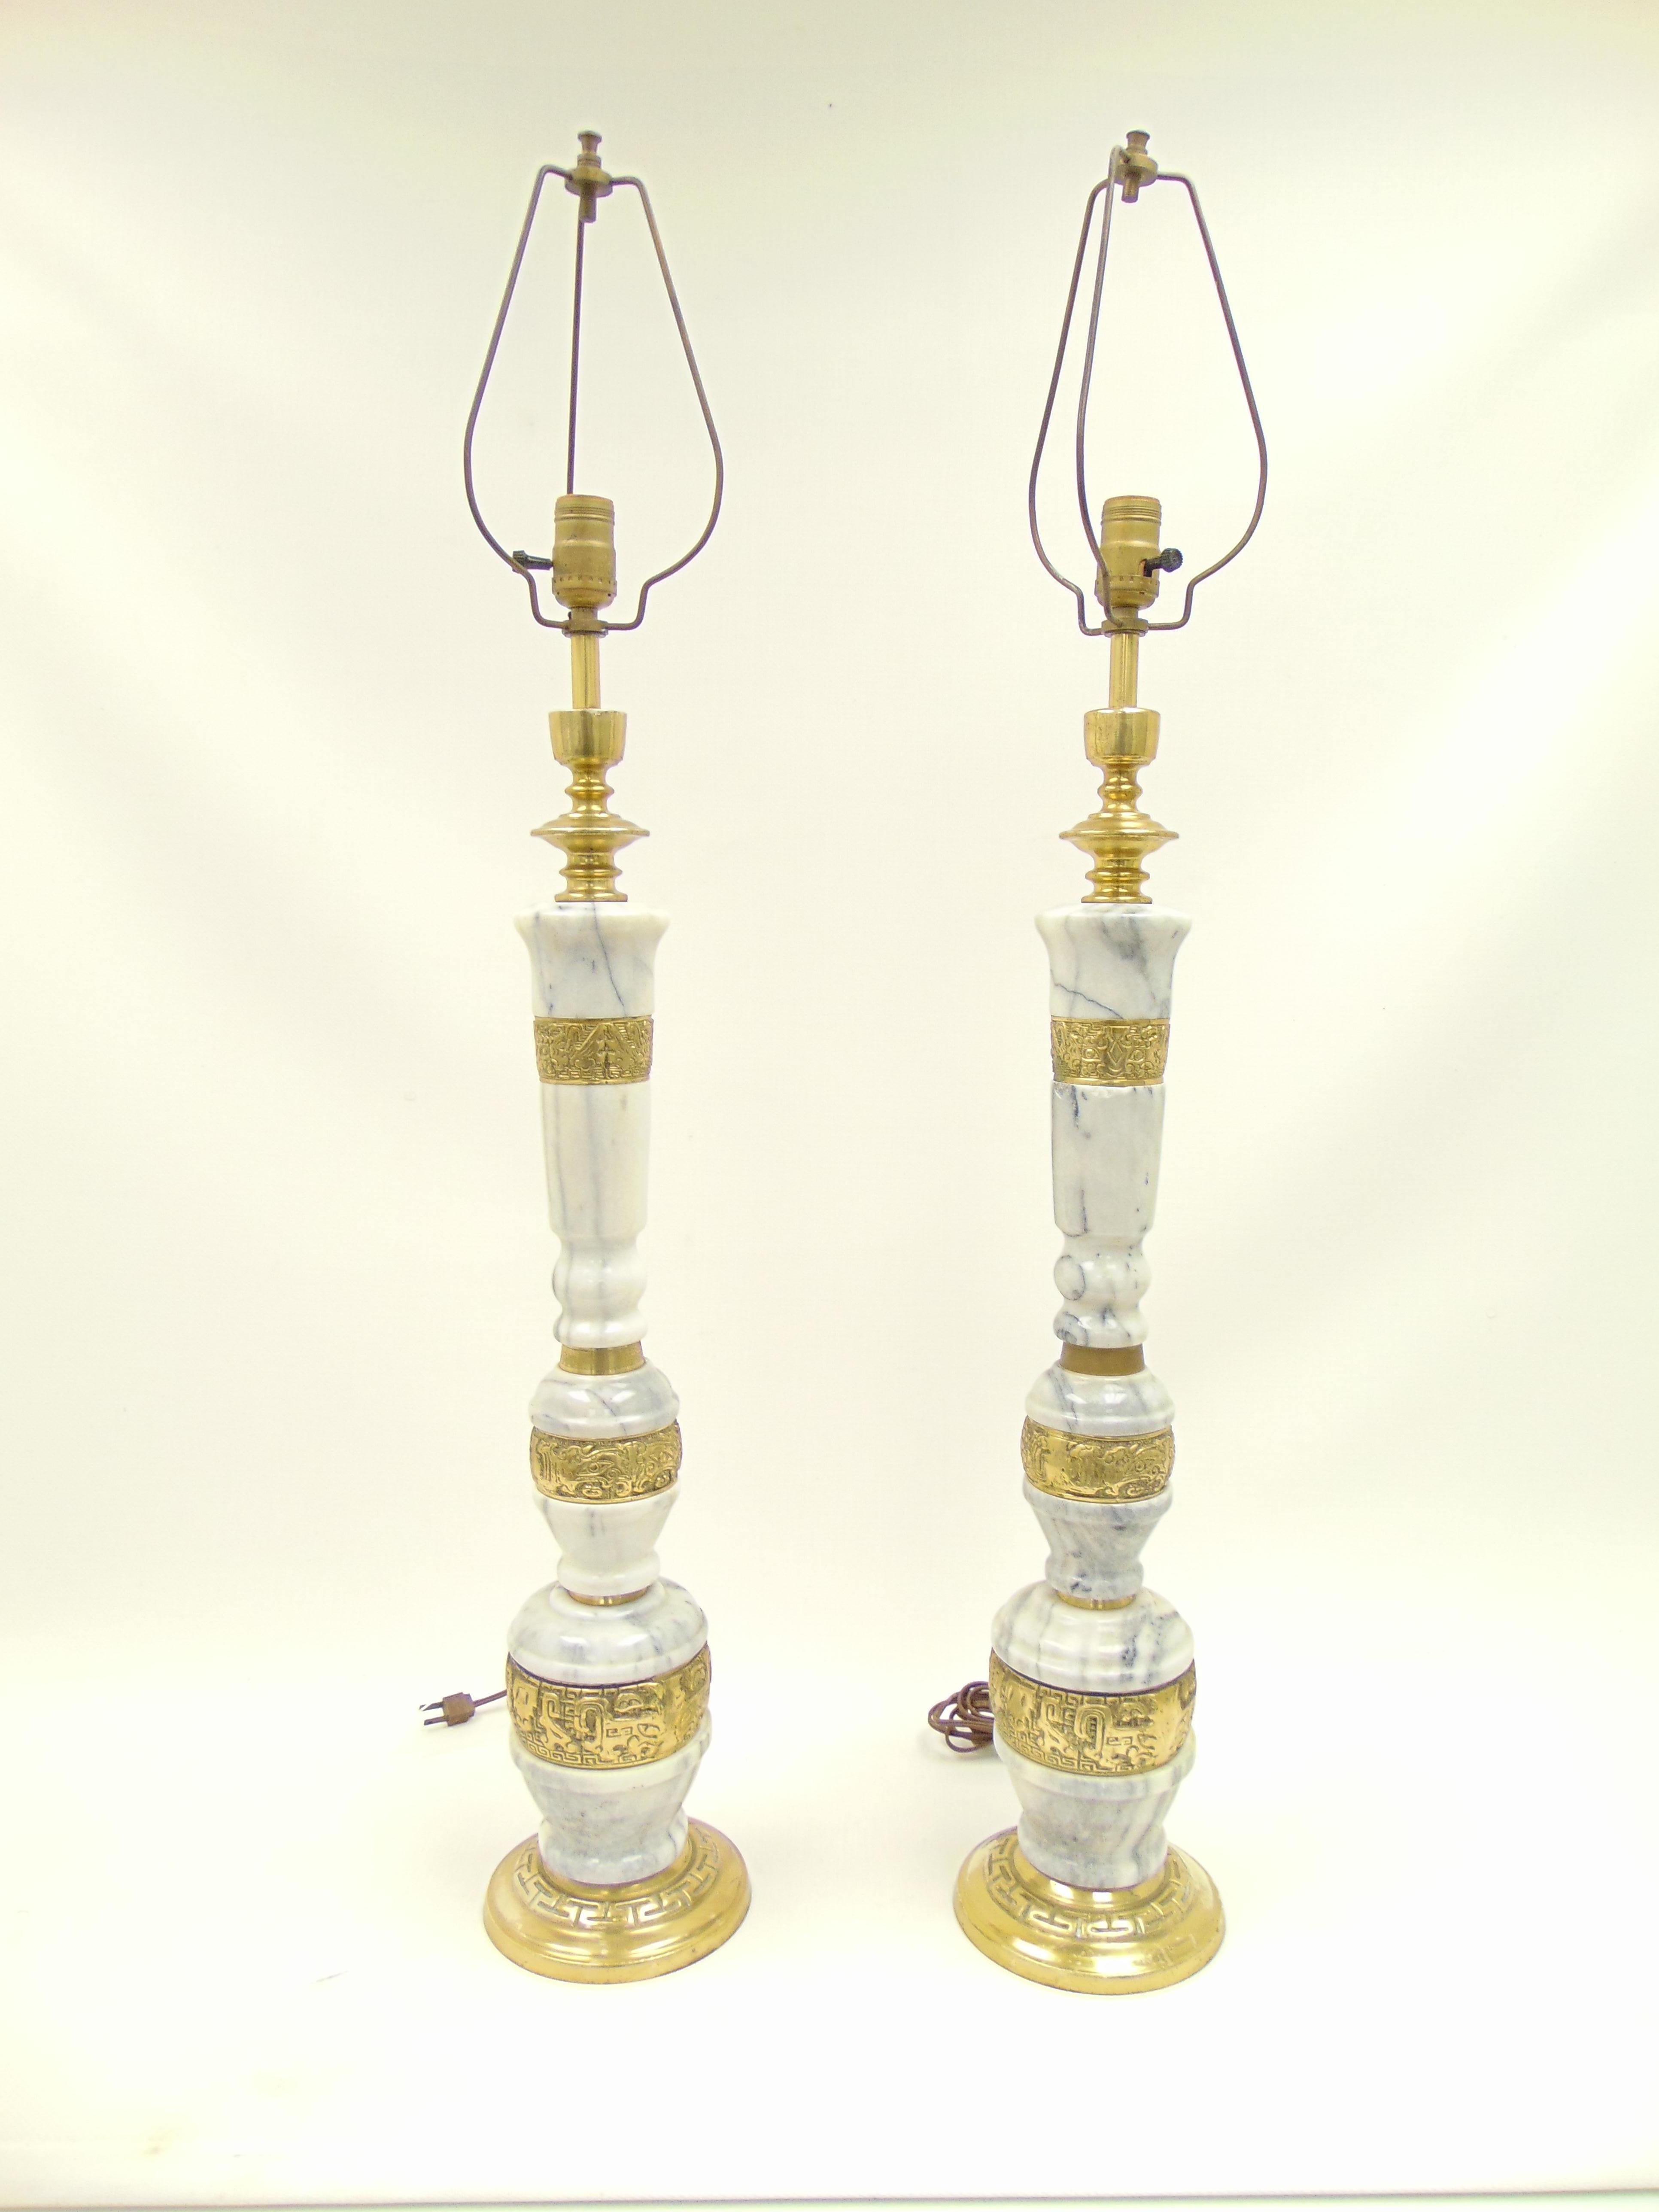 Beautiful pair of vintage rare lamps made of marble and brass with detailed designs in the brass. The dimensions are: 39” total height, 32” height to bulb, 6.25” diameter of base.